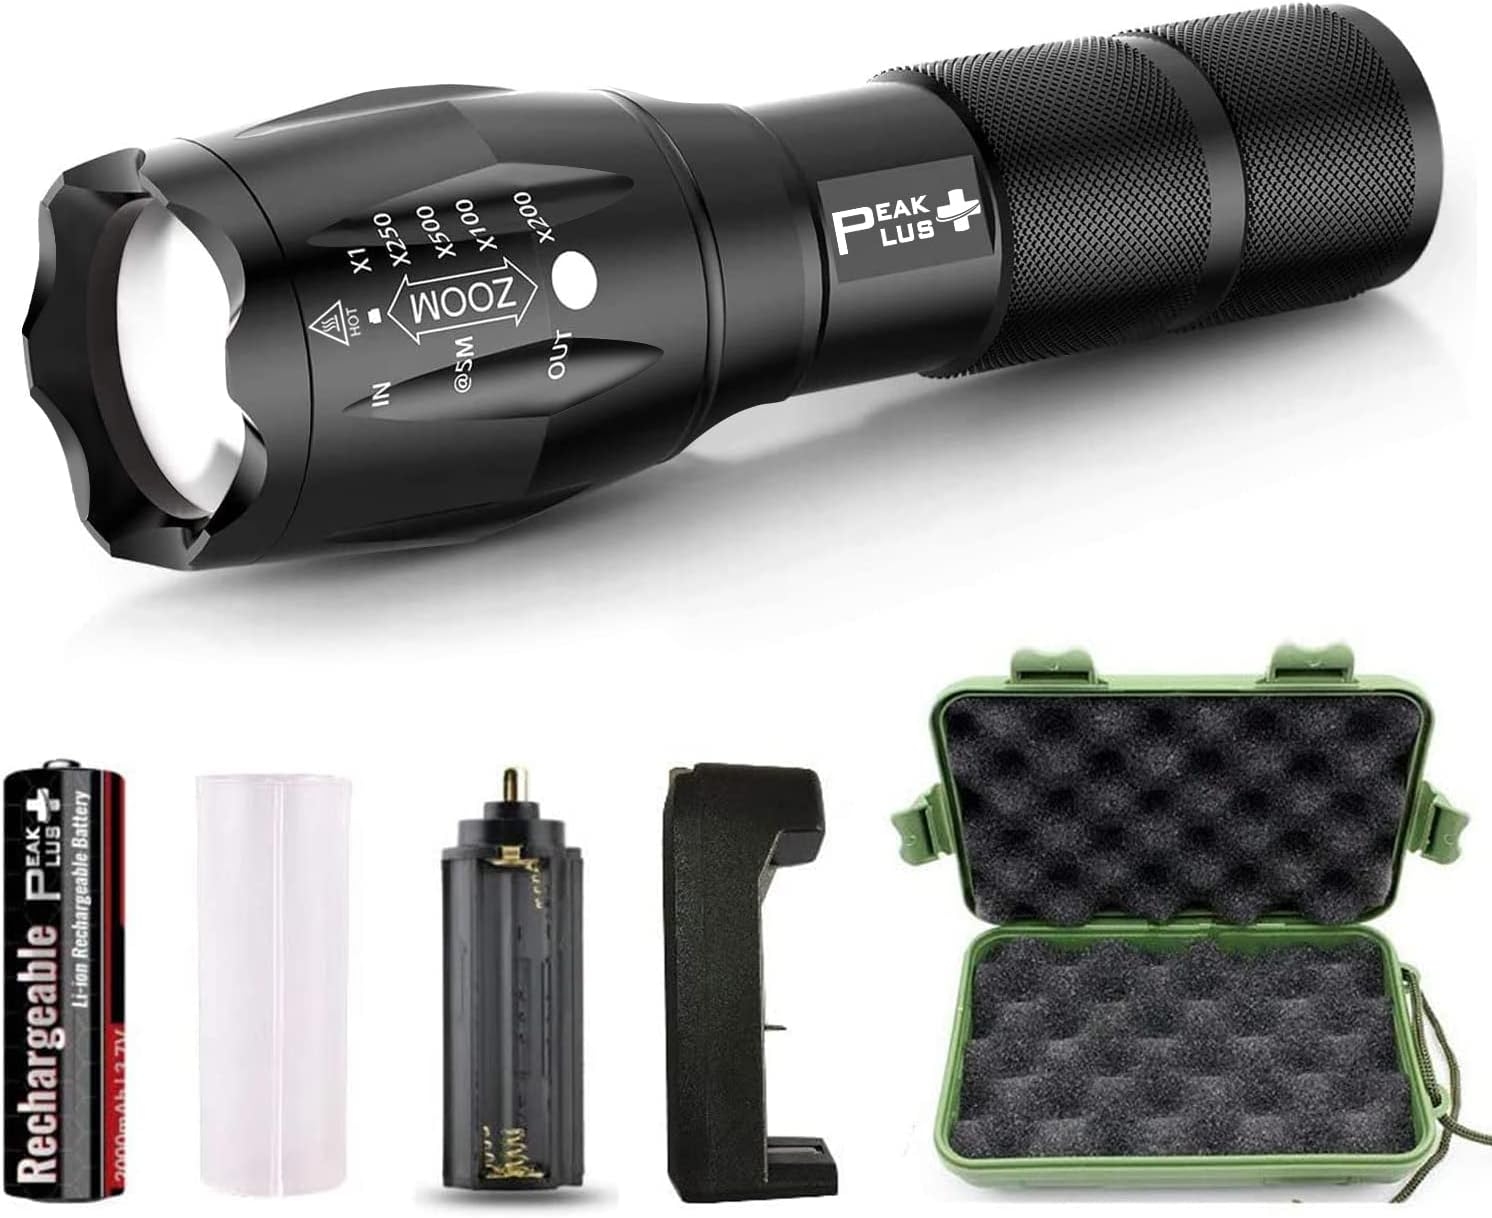 PeakPlus Rechargeable Tactical Flashlight LFX1000 (18650 Battery and Charger Included) - High Lumens LED, Super Bright, Zoomable, 5 Modes, Water Resistant - Best Camping, Emergency Flashlights